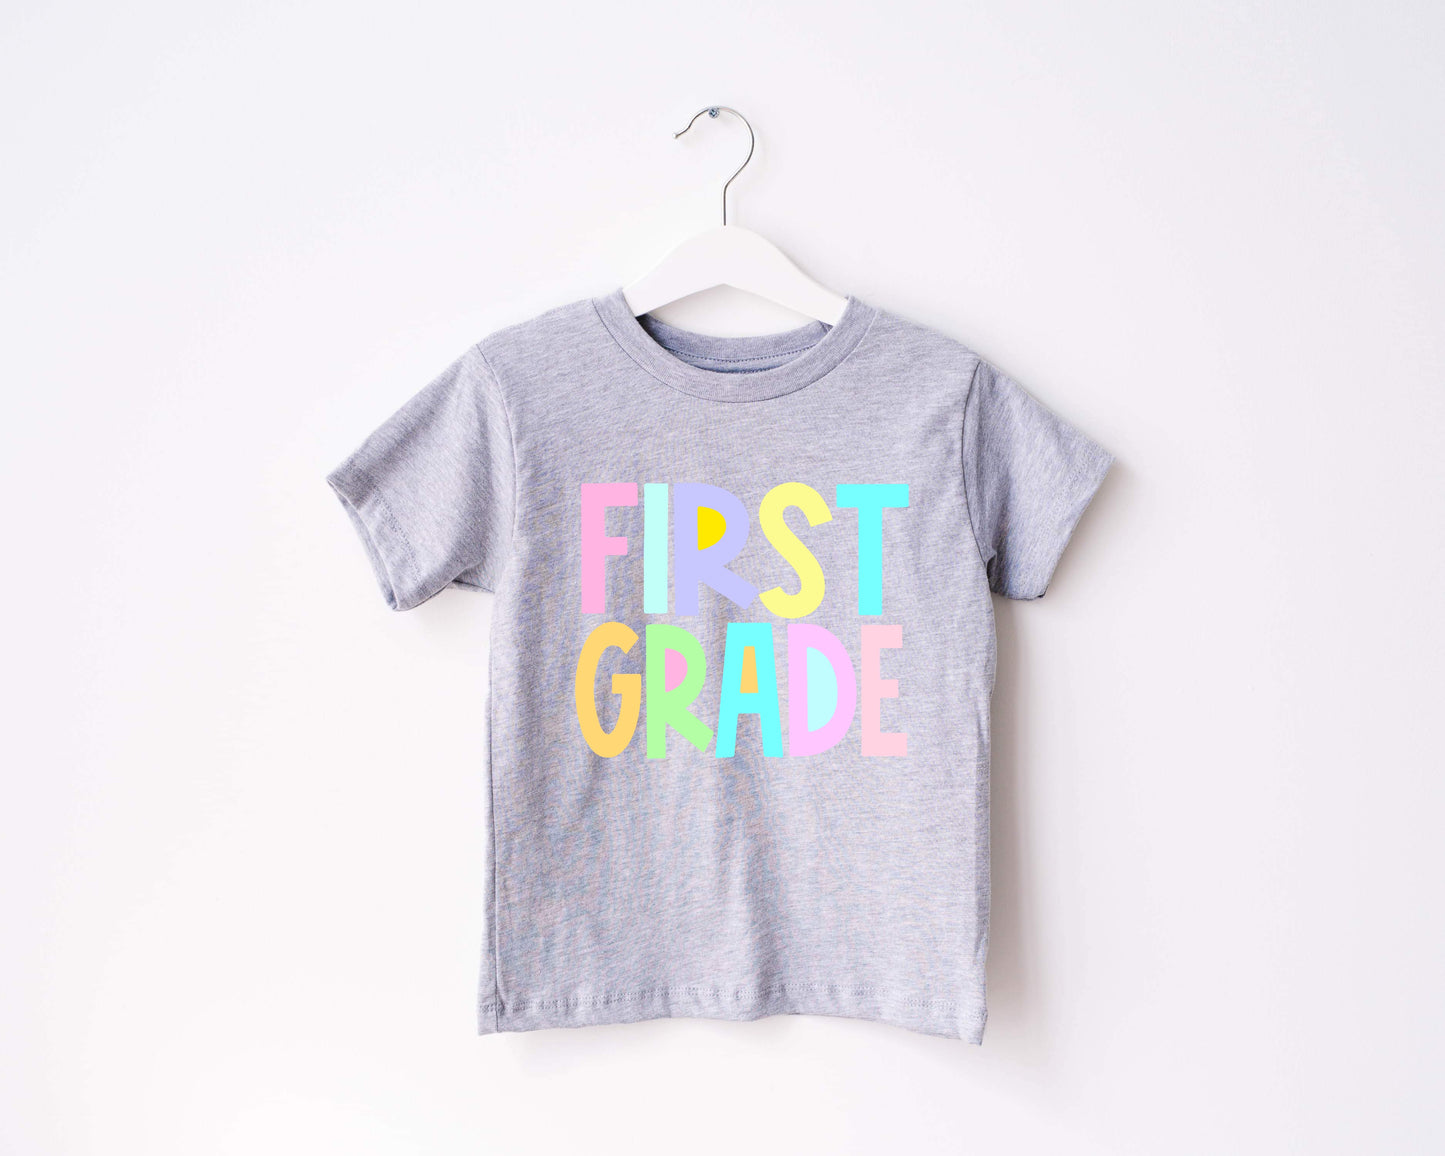 First Grade Graphic Tee